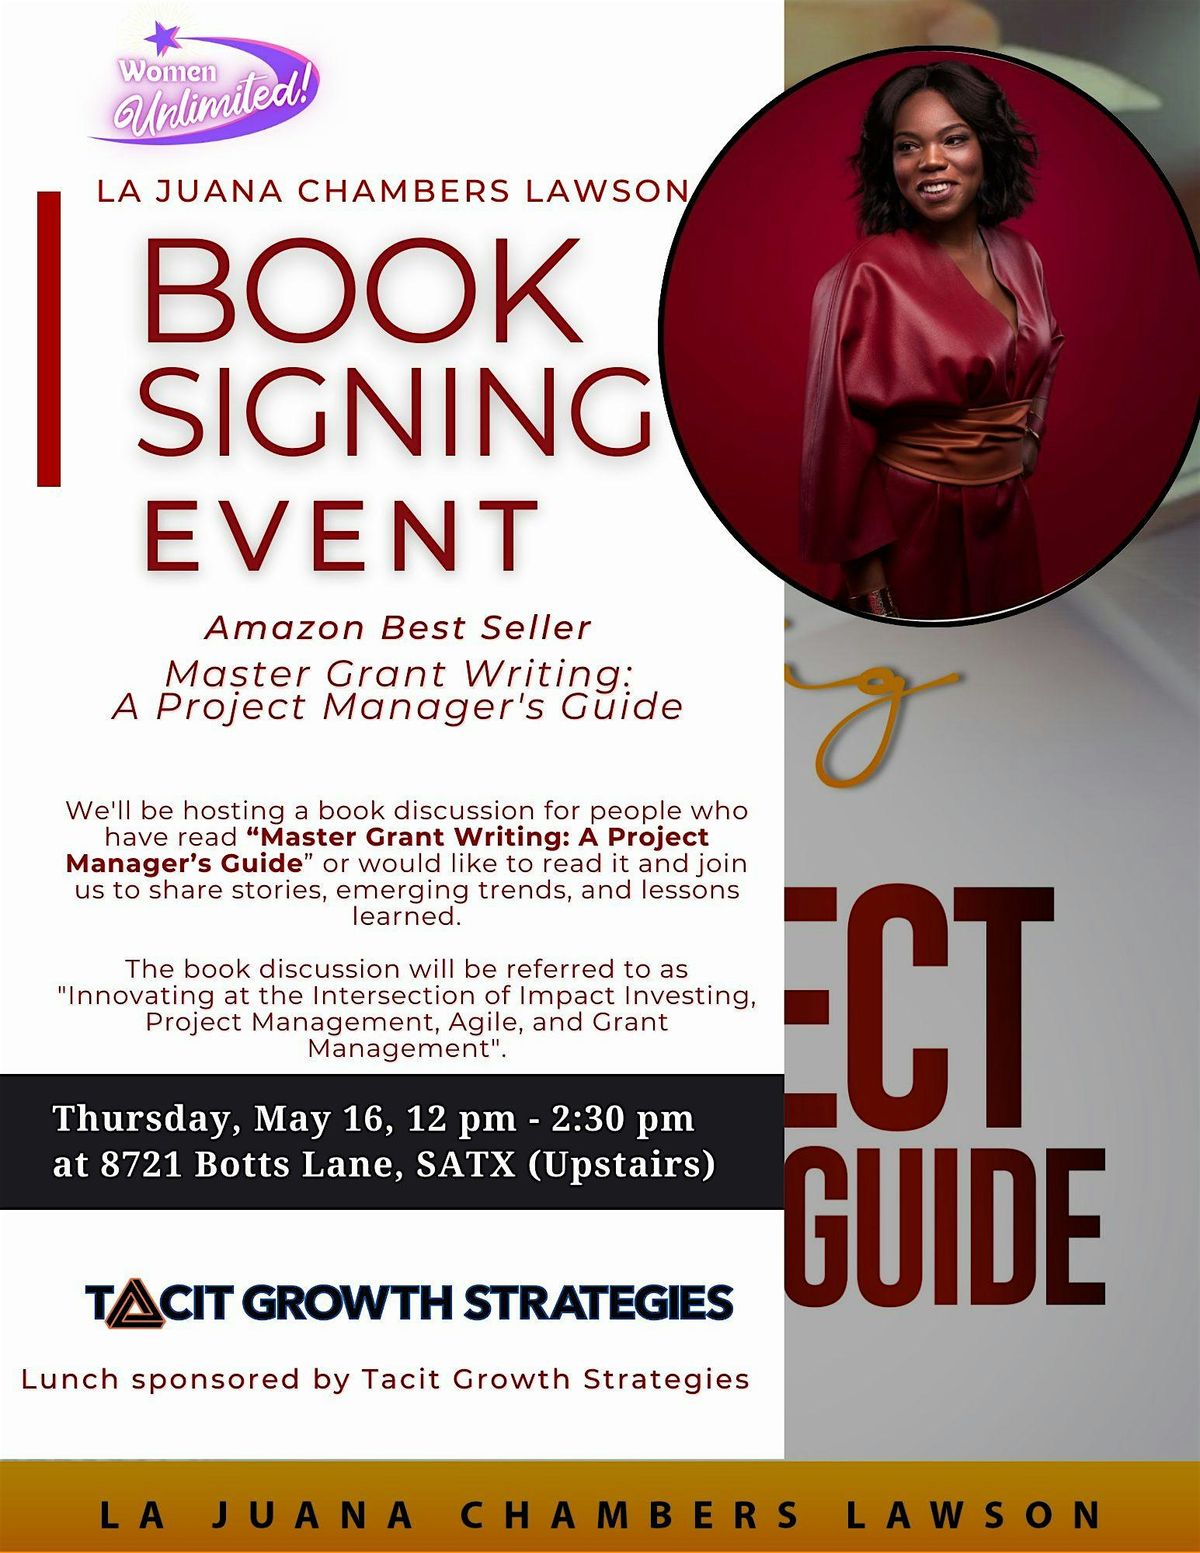 Women Unlimited Presents: LJ Chambers Lawson Book Signing